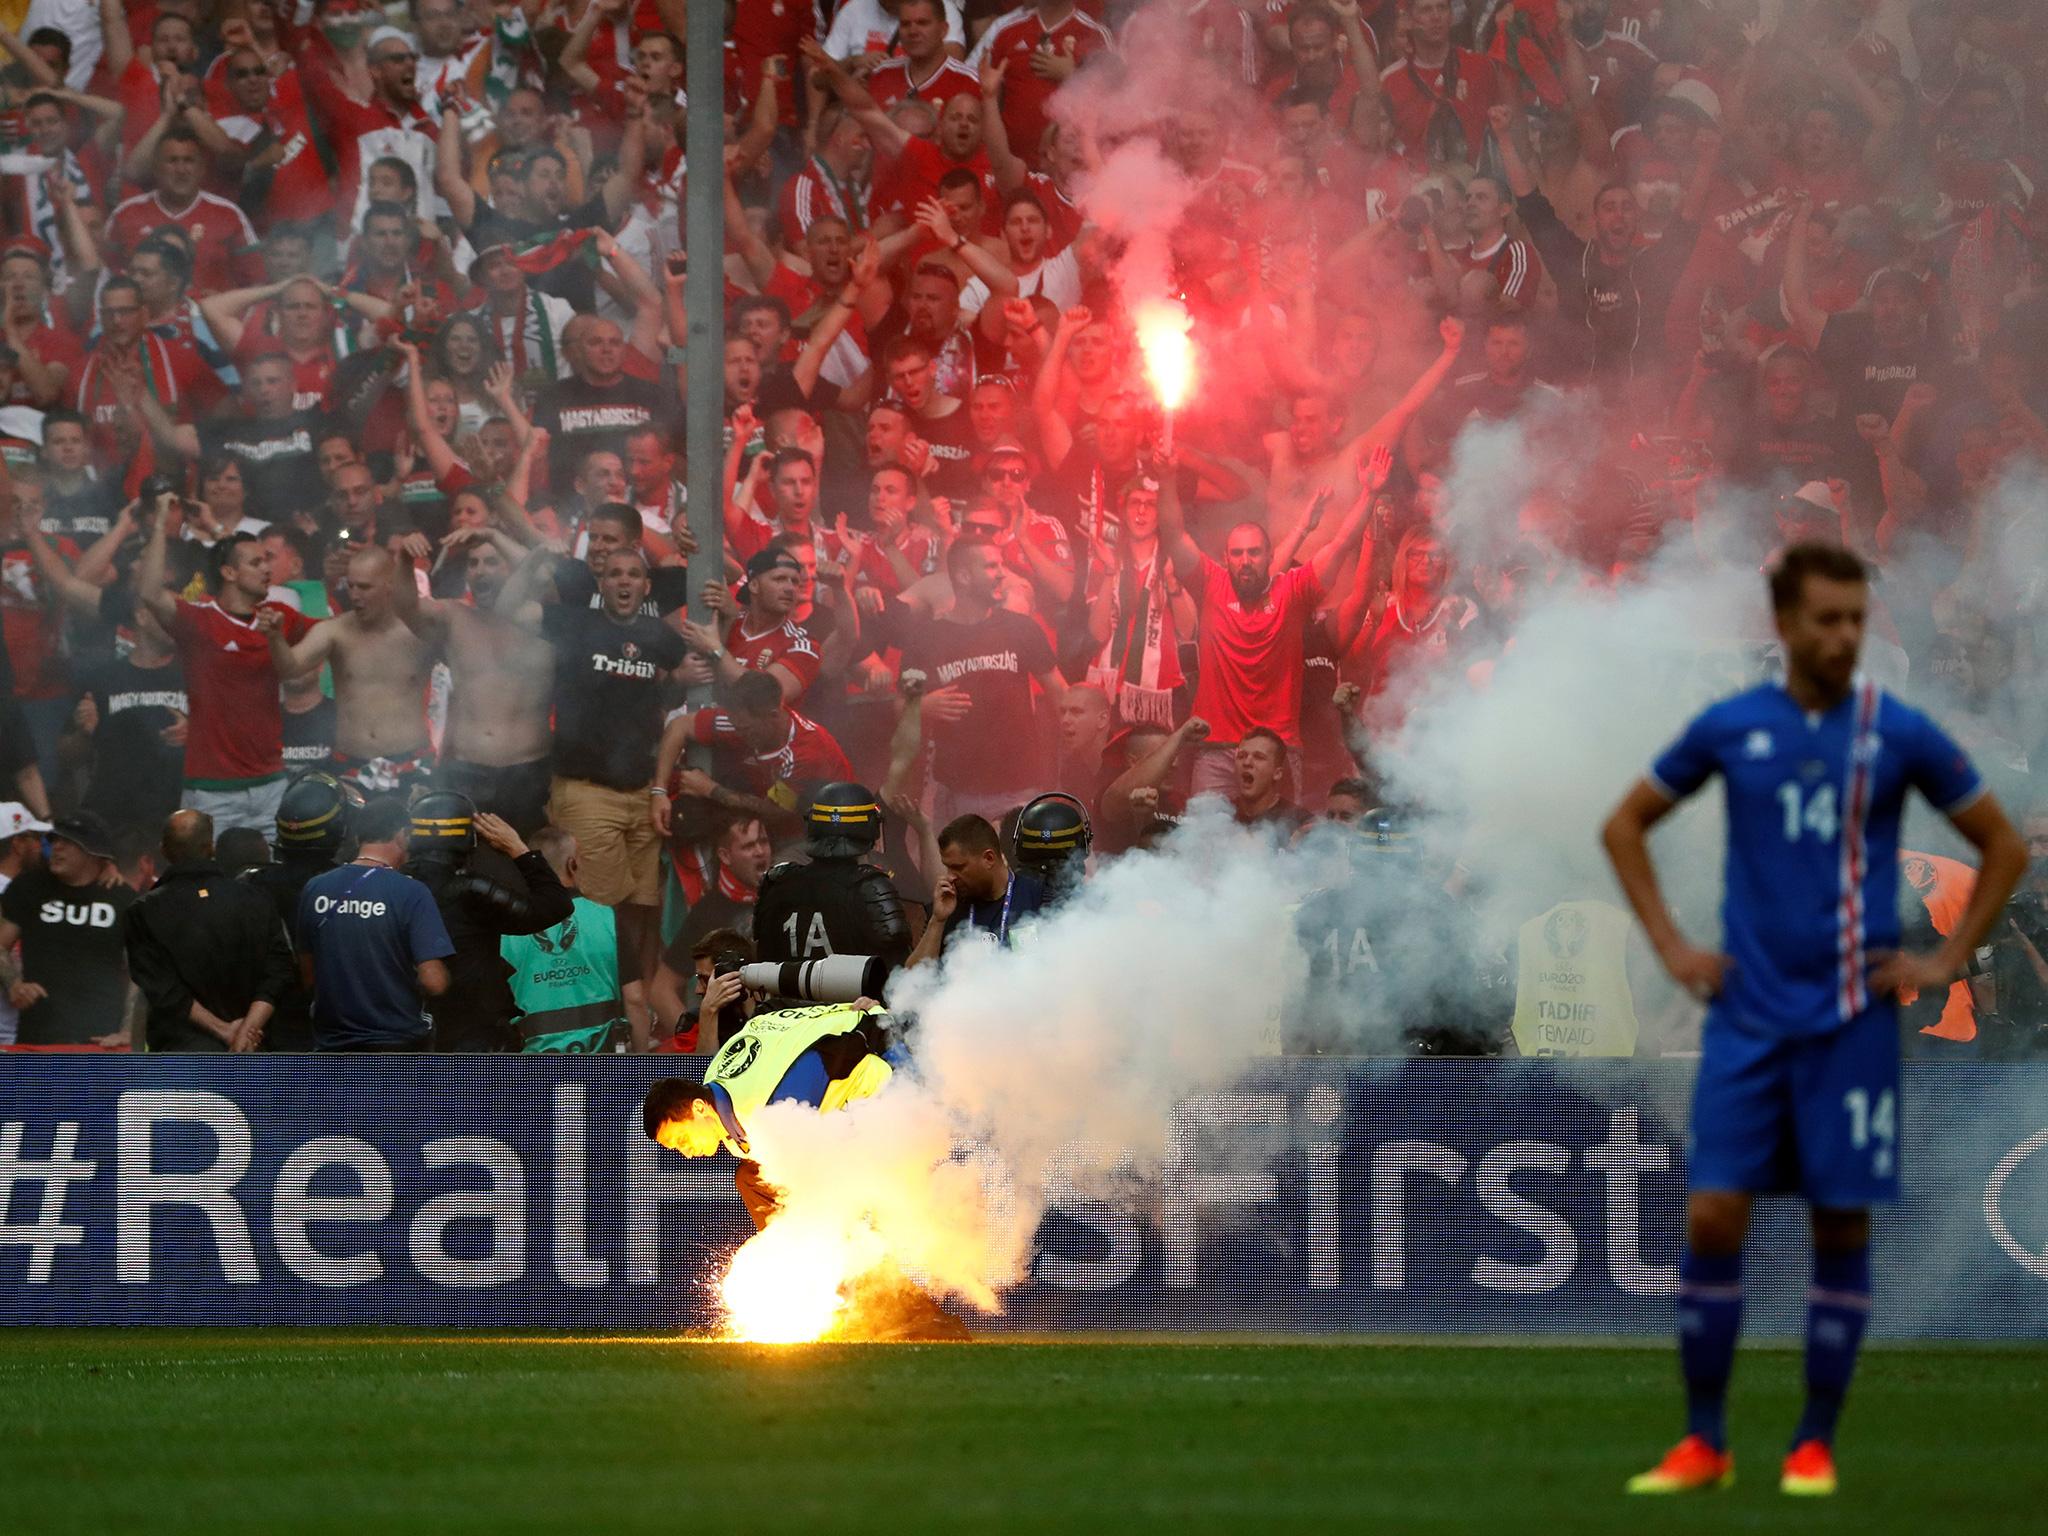 Hungary fans set off flares following their equaliser against Iceland